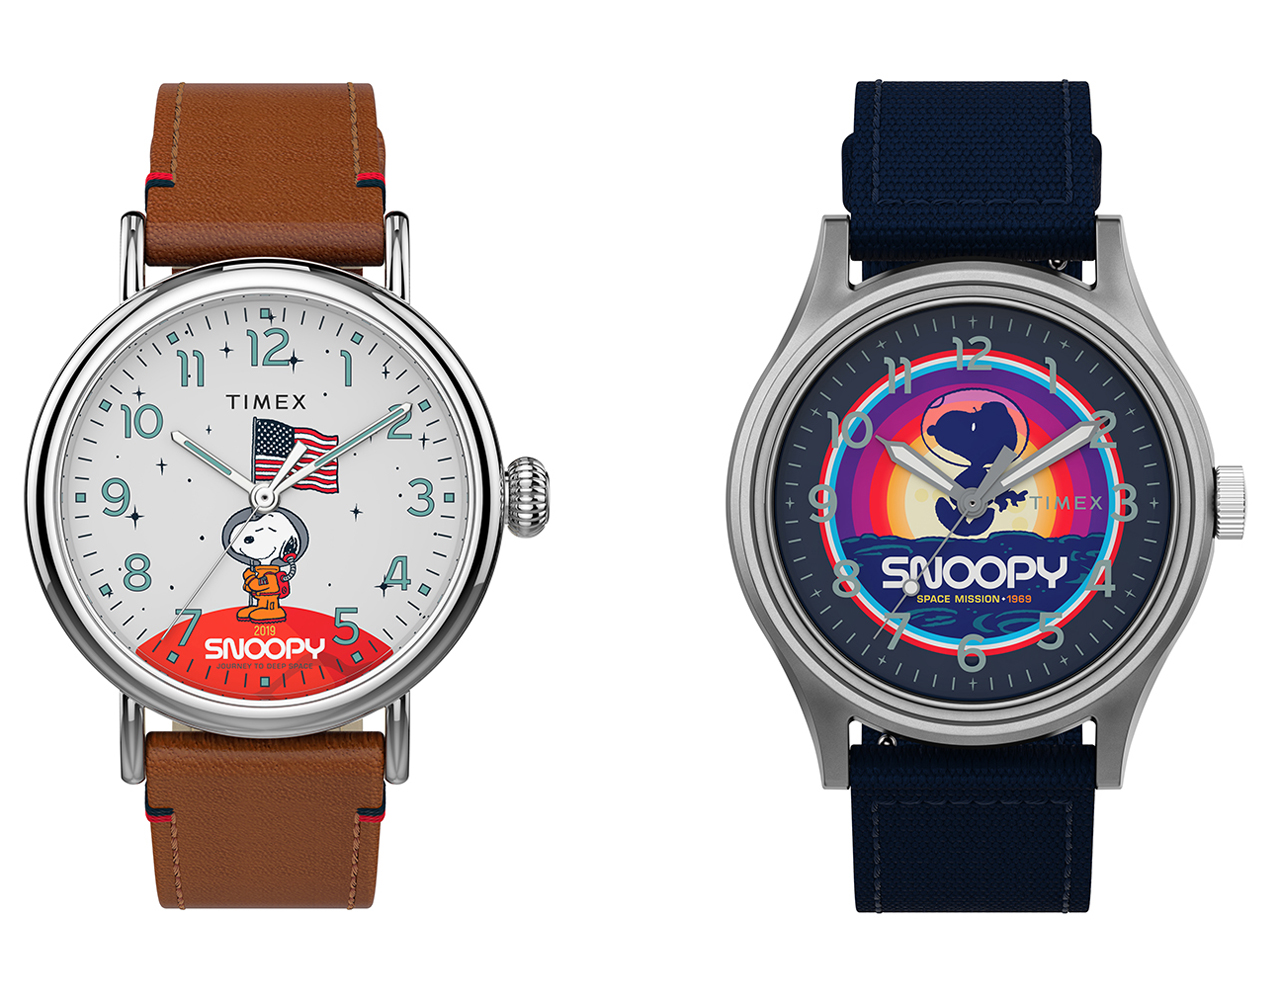 Timex peanuts snoopy in space watches top